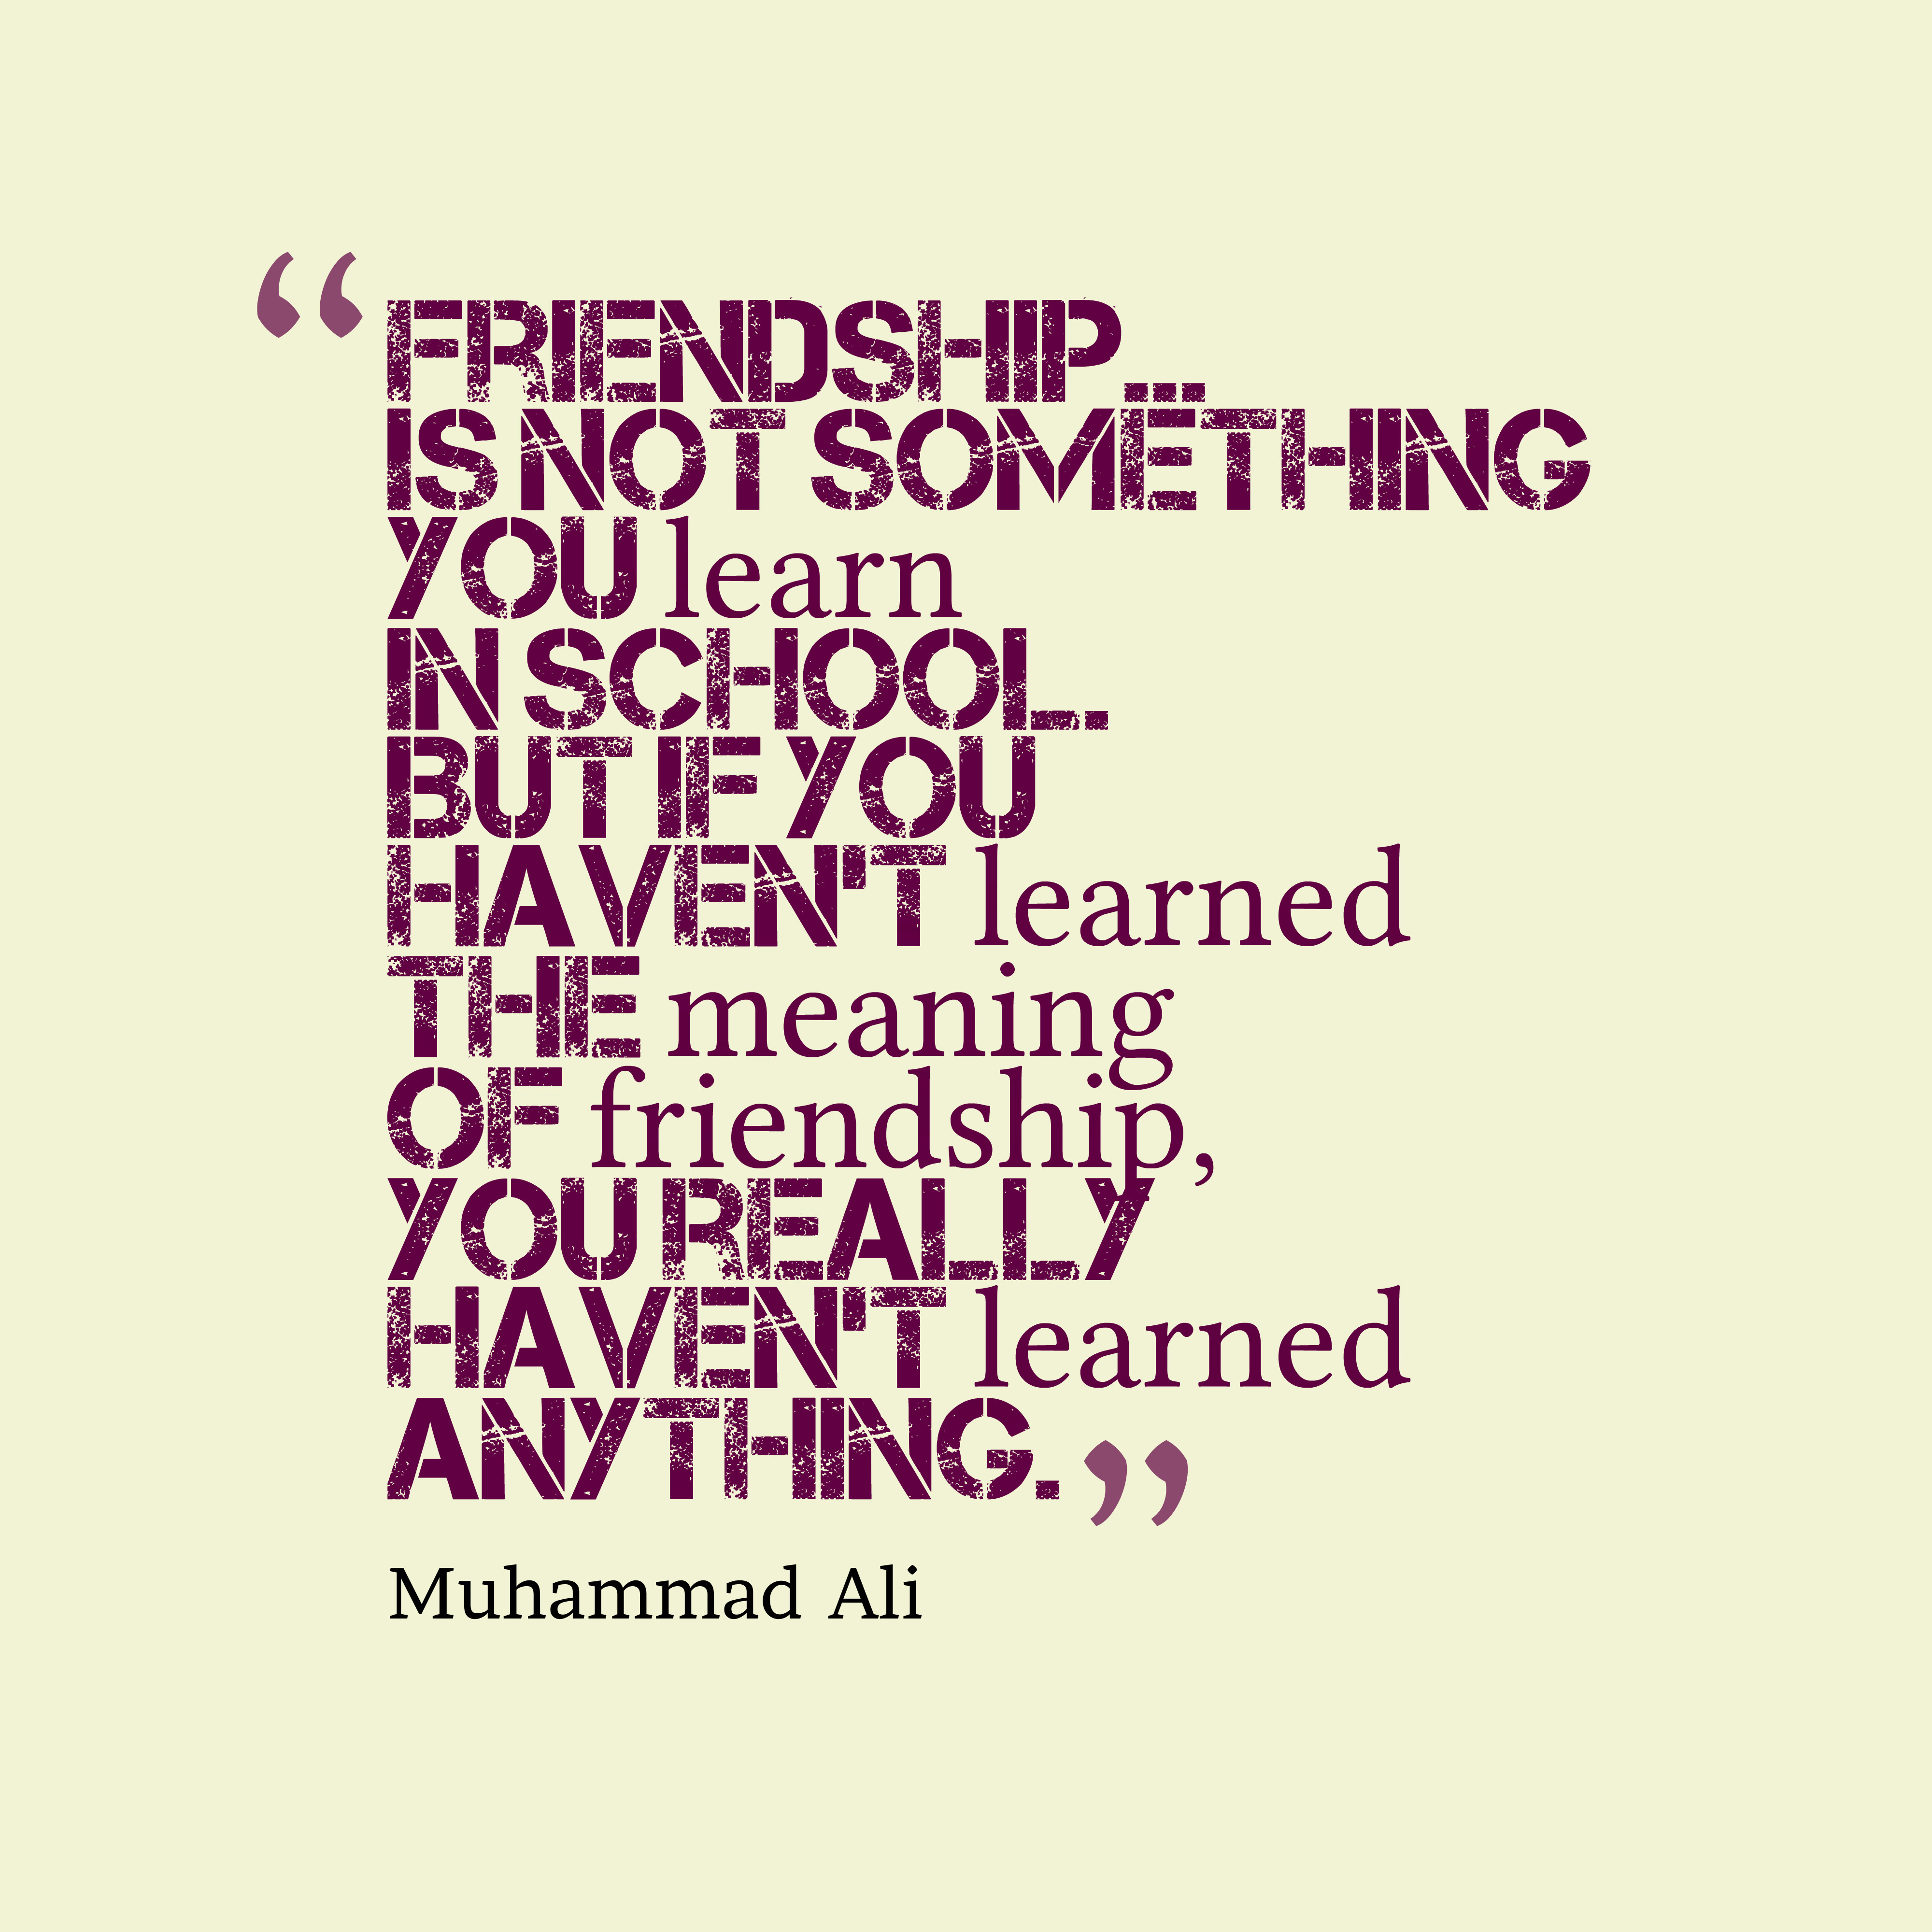 Beautiful Quotes On Friendship
 The 20 Most Beautiful Friendship Quotes